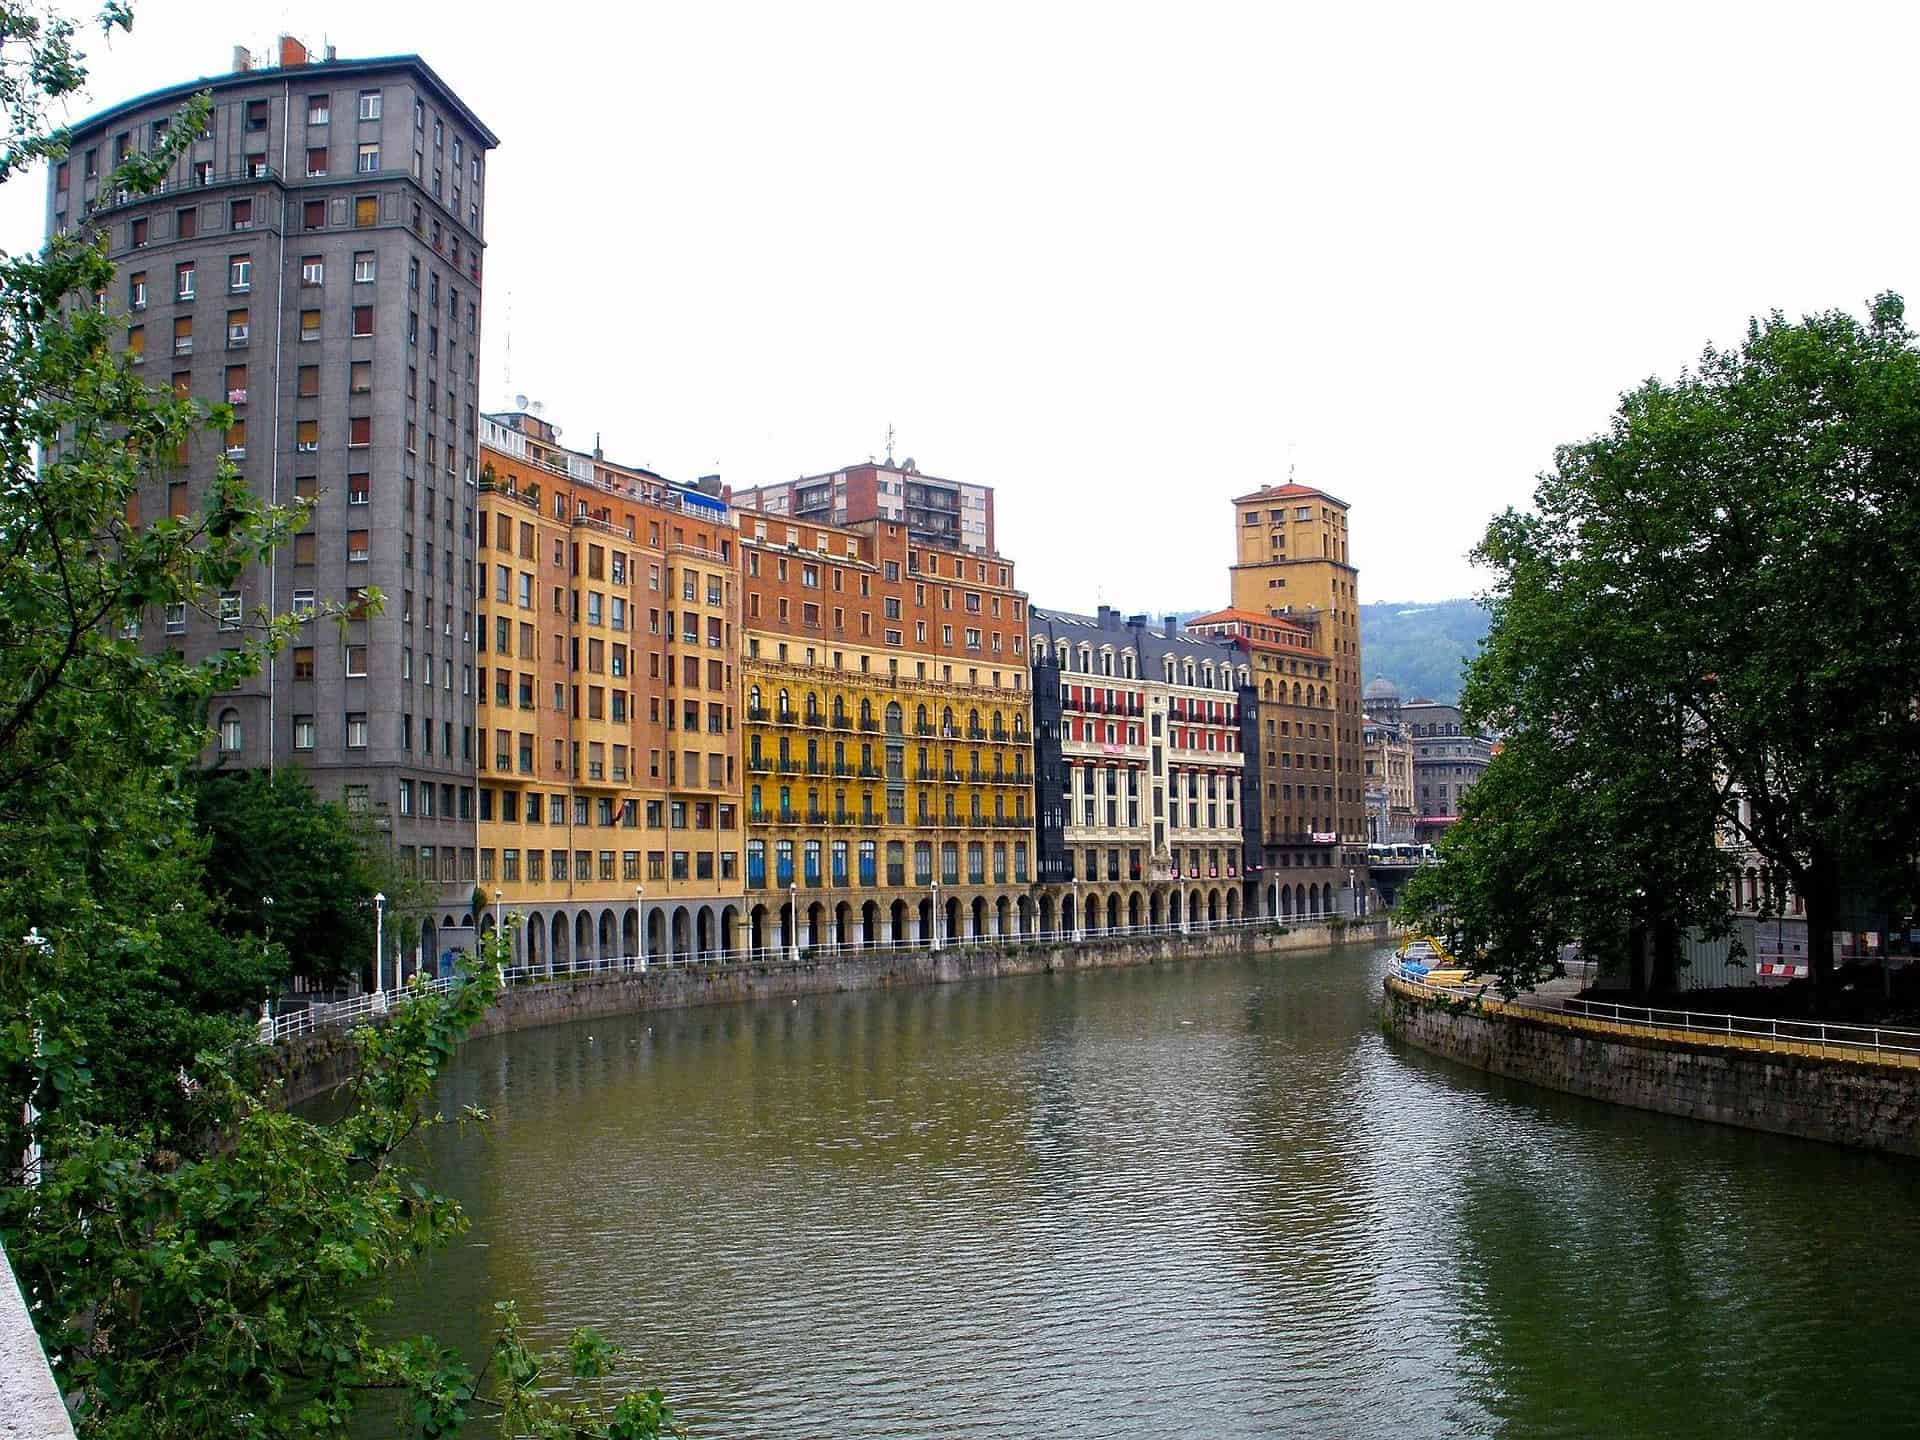 Best things to do in Bilbao Spain - Lindsay Woychick - canal view by David Mark on Pixabay